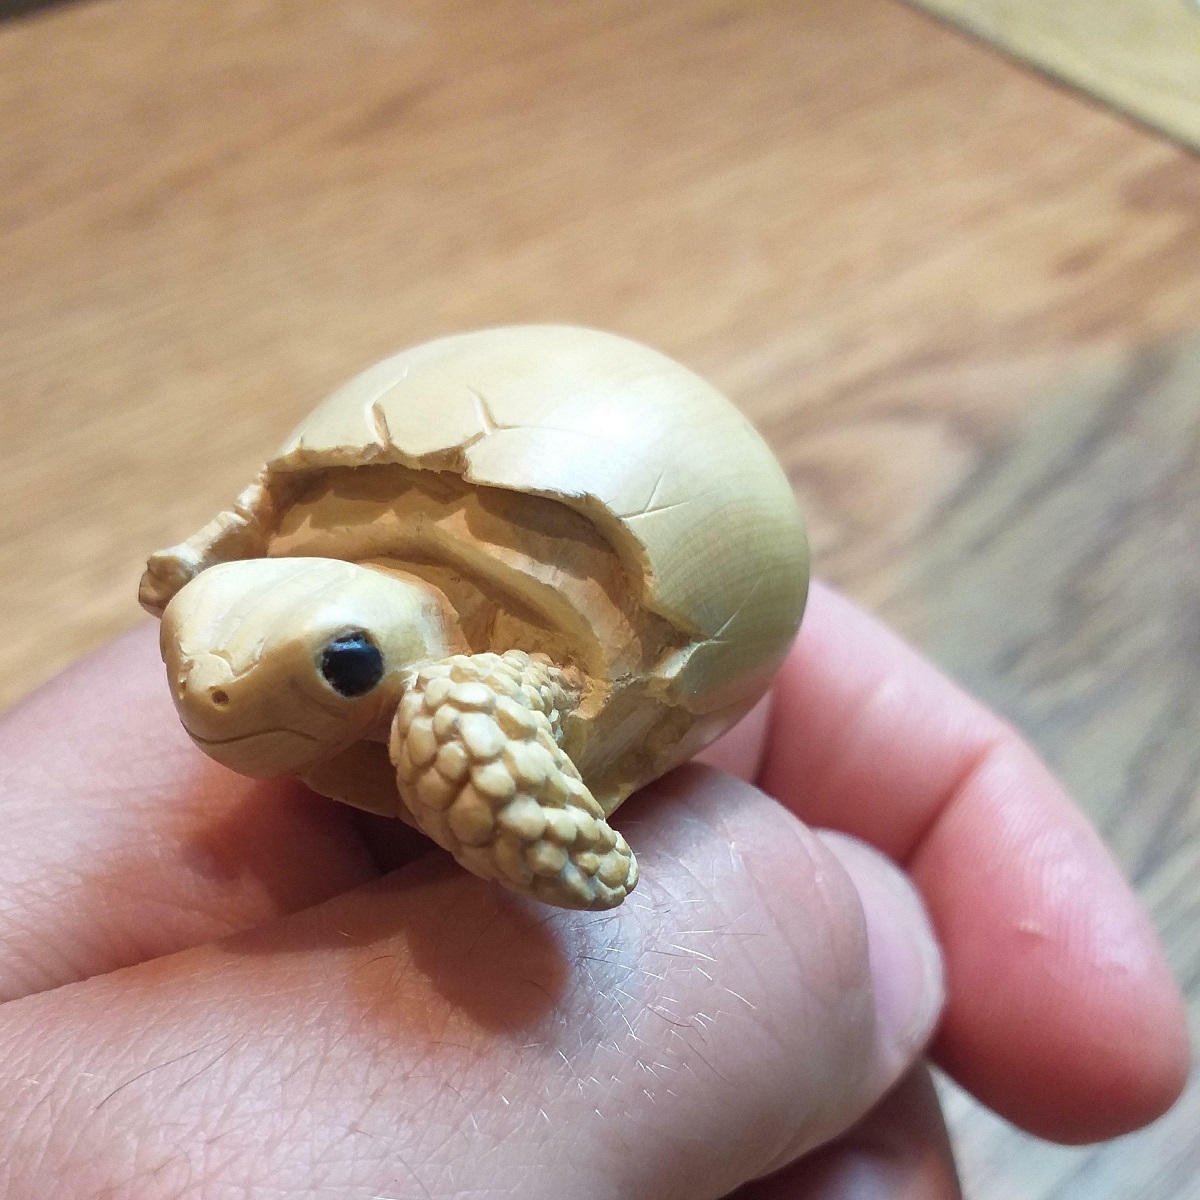 Baby Turtle Emerging From Its Egg. Hand Carved By Me, In Boxwood And Horn Eyes. I hope You Like It. Happy New Year To Everyone, Particularly The Loyal Followers! Happy Carving!